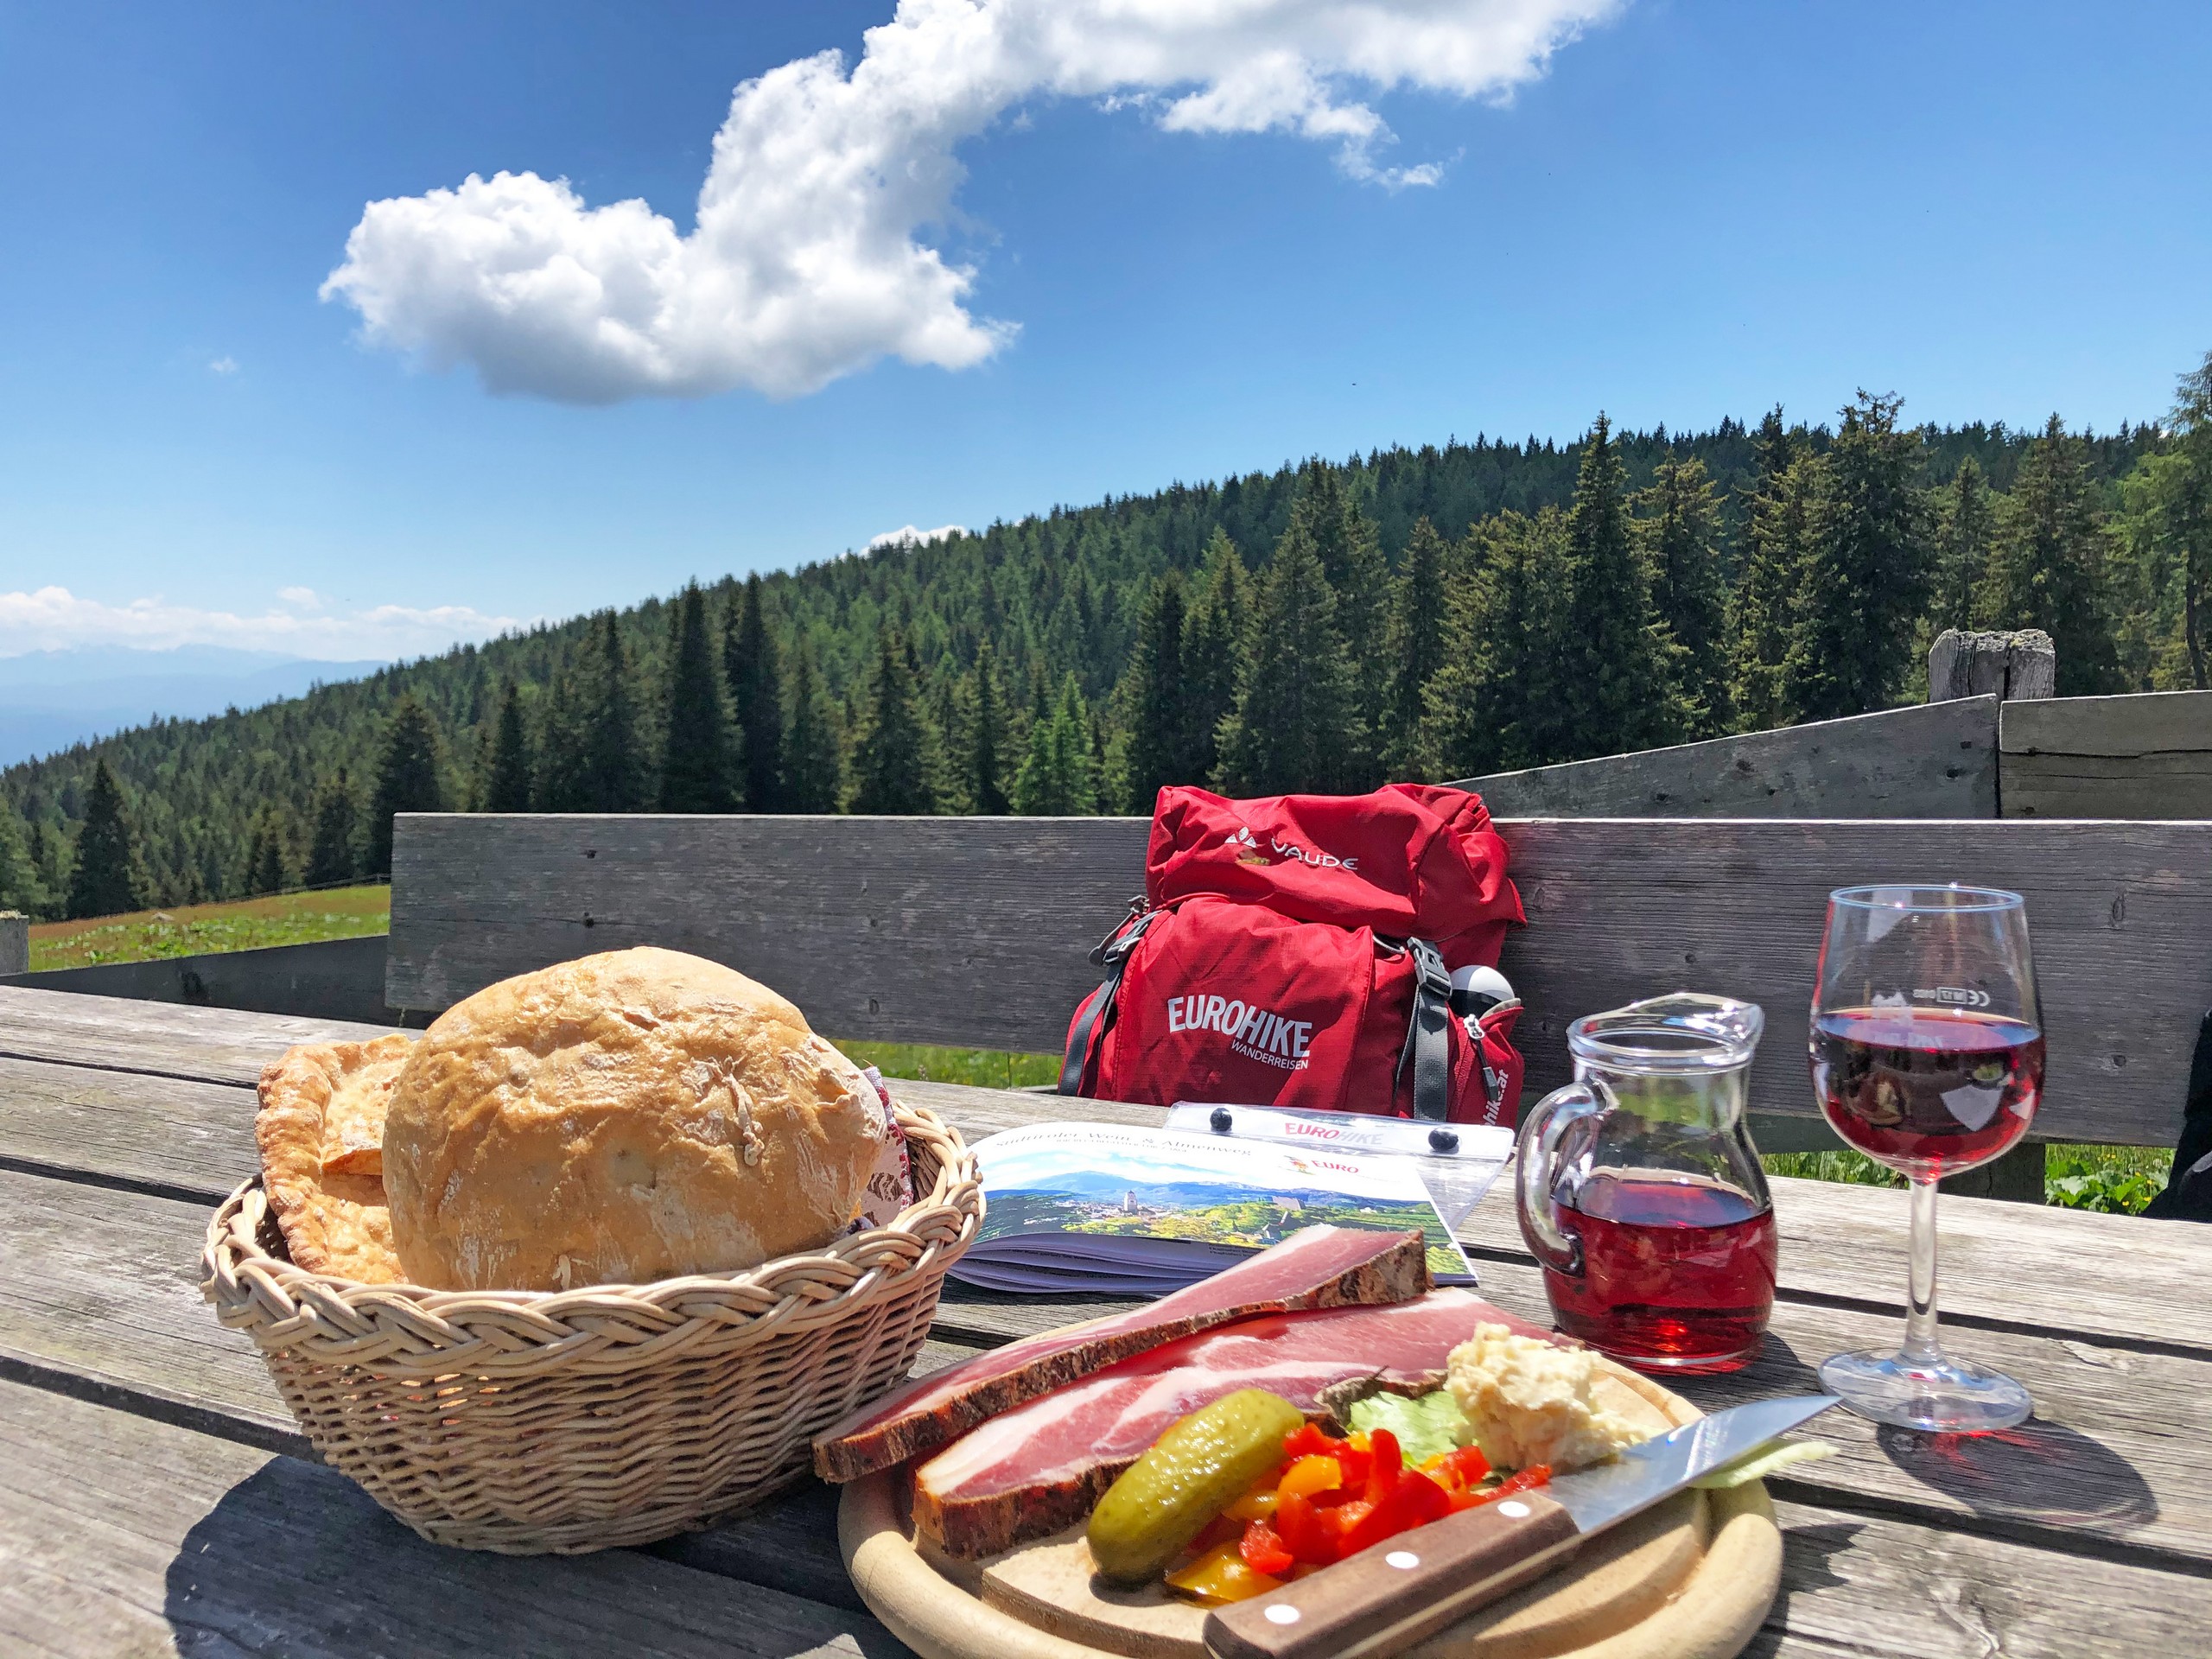 Lunch break on self-guided South Tyrol tour